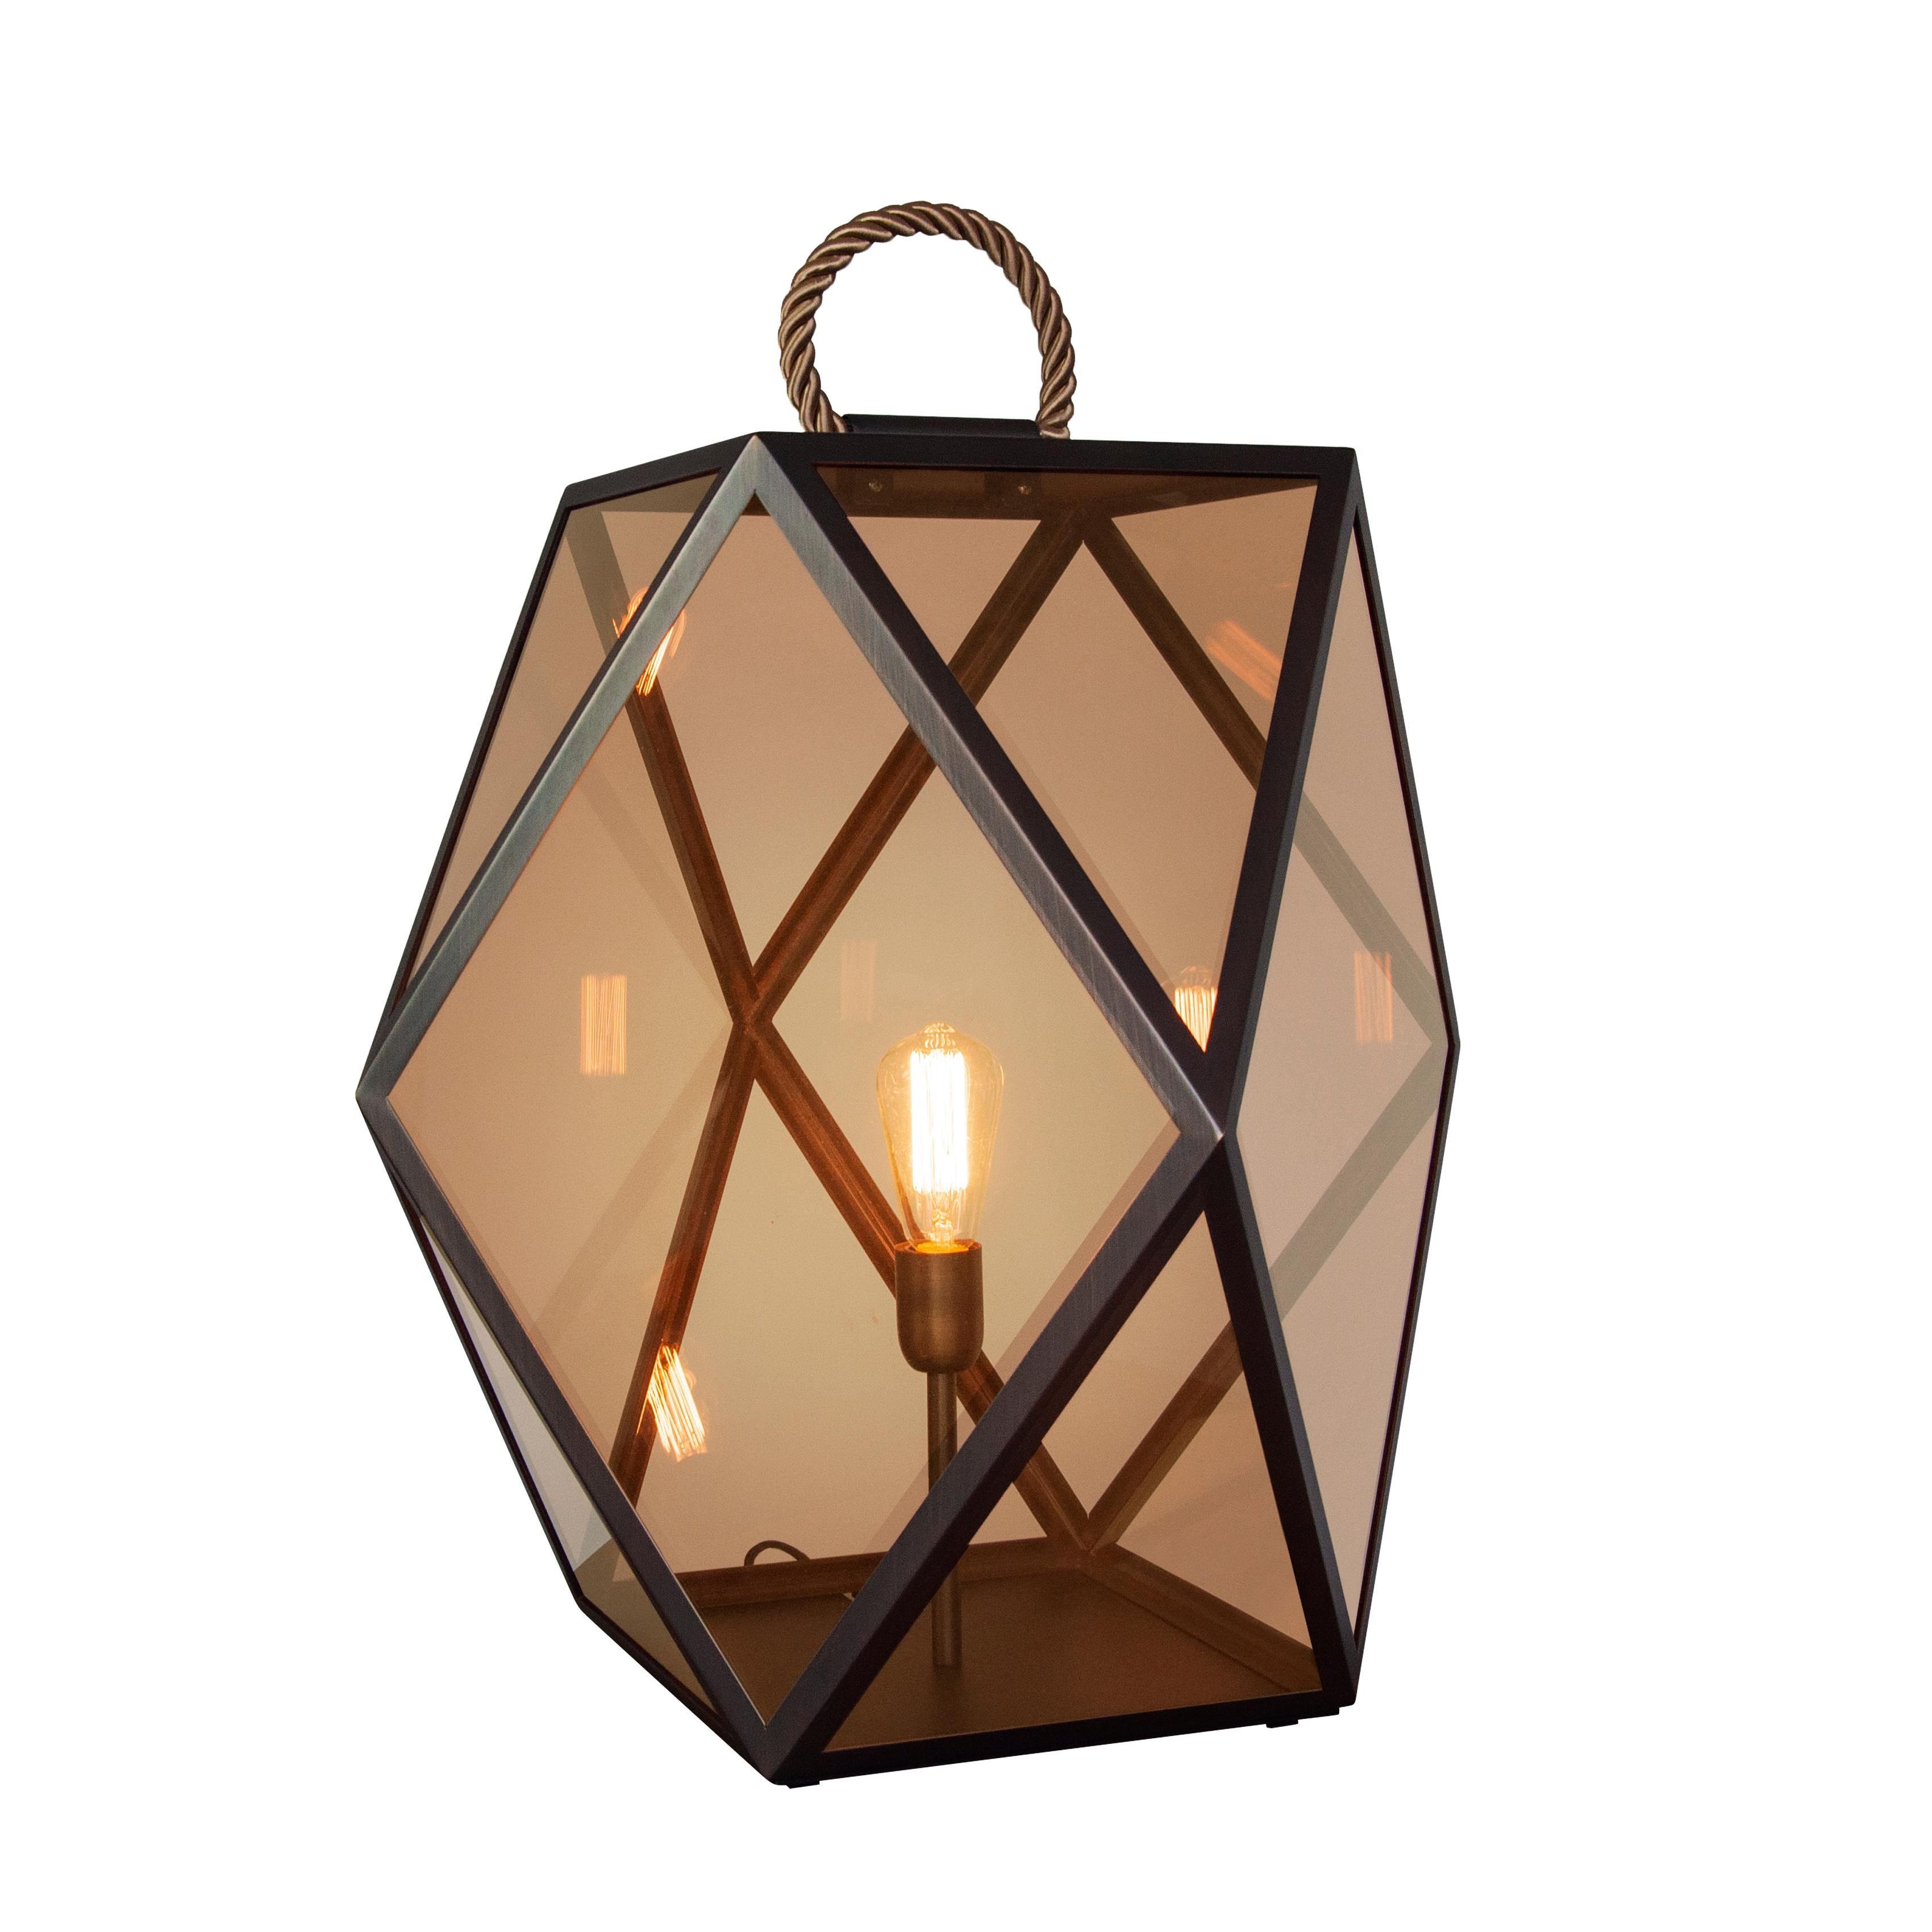 An iconic Contardi product, Muse Lantern is a lantern with an original and precious design thanks to sophisticated details such as the honey-coloured braided silk handle, the satin bronze finish and the vintage-look structure. It is available in